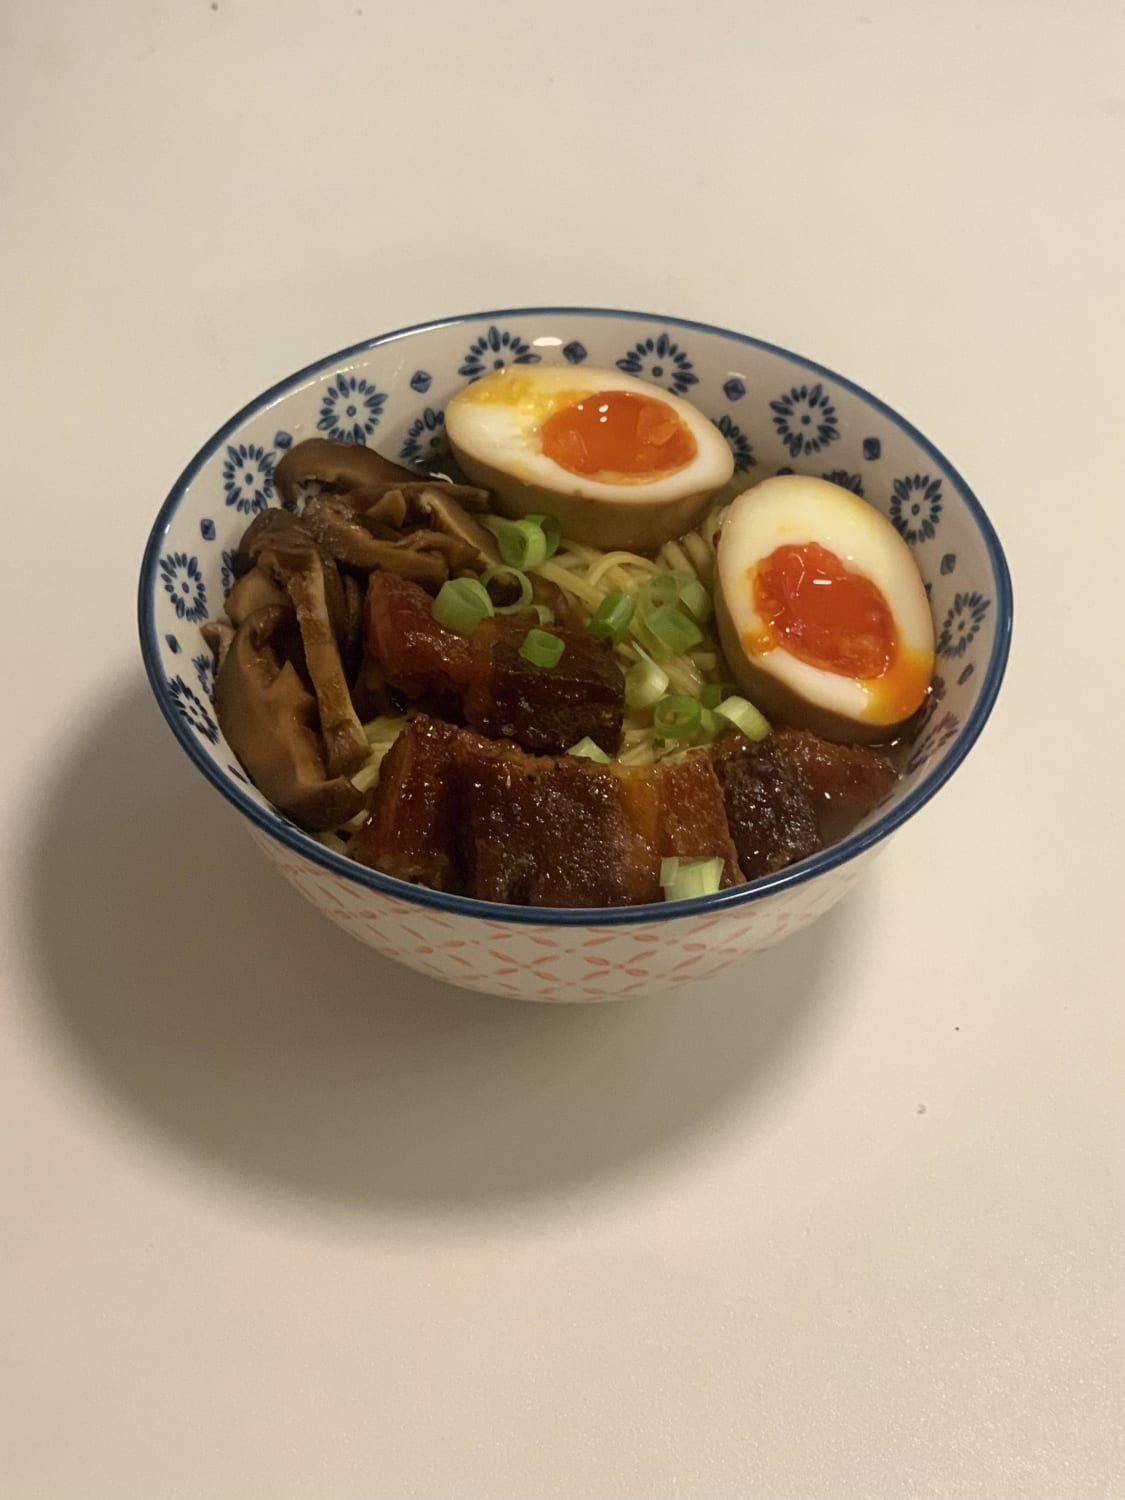 Ramen I made for dinner with home pickled Shiitake mushrooms, 7 hour Soy eggs and vegan pork belly. I forgot the edamame beans though 😭